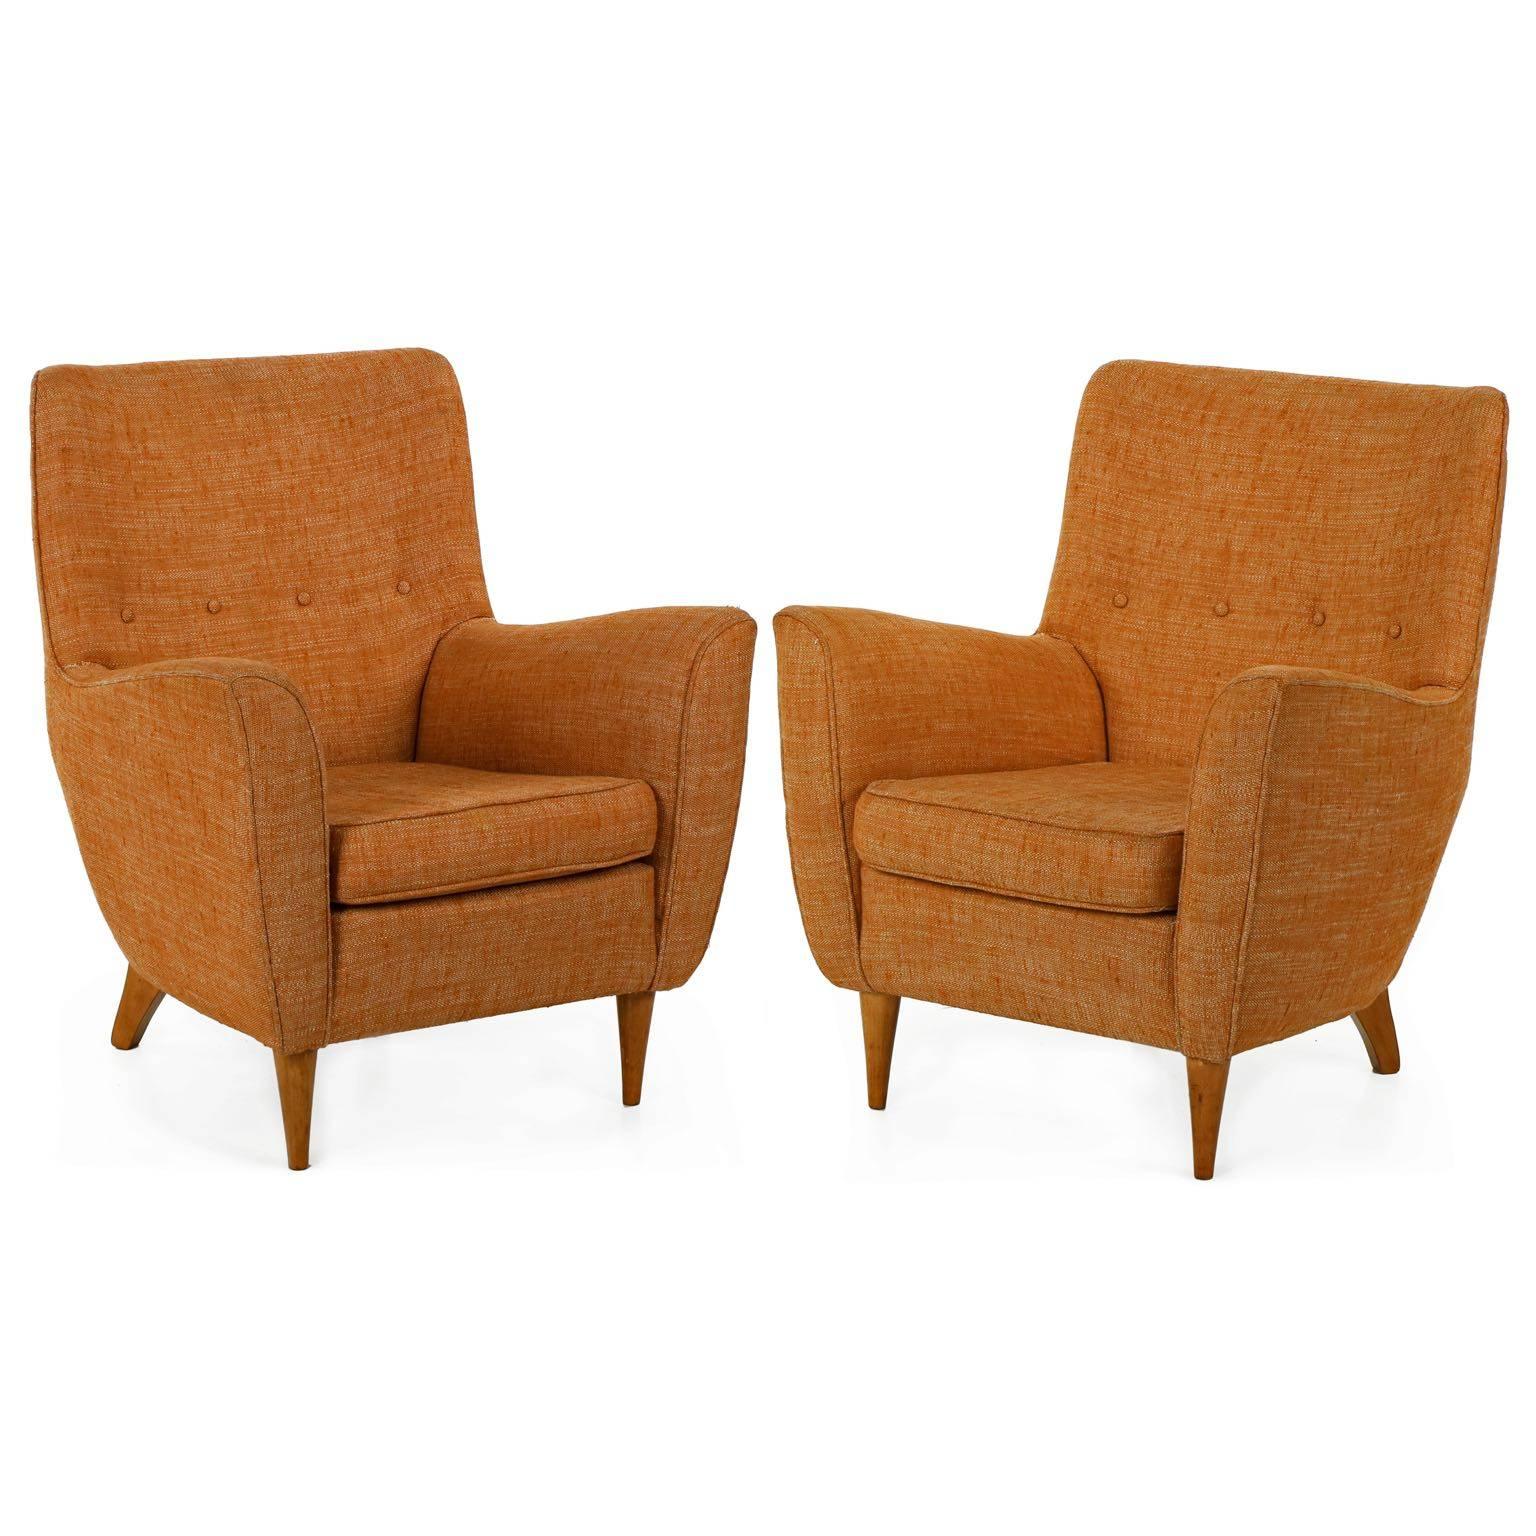 Pair of Vintage Mid-Century Modern Sculpted Lounge Armchairs